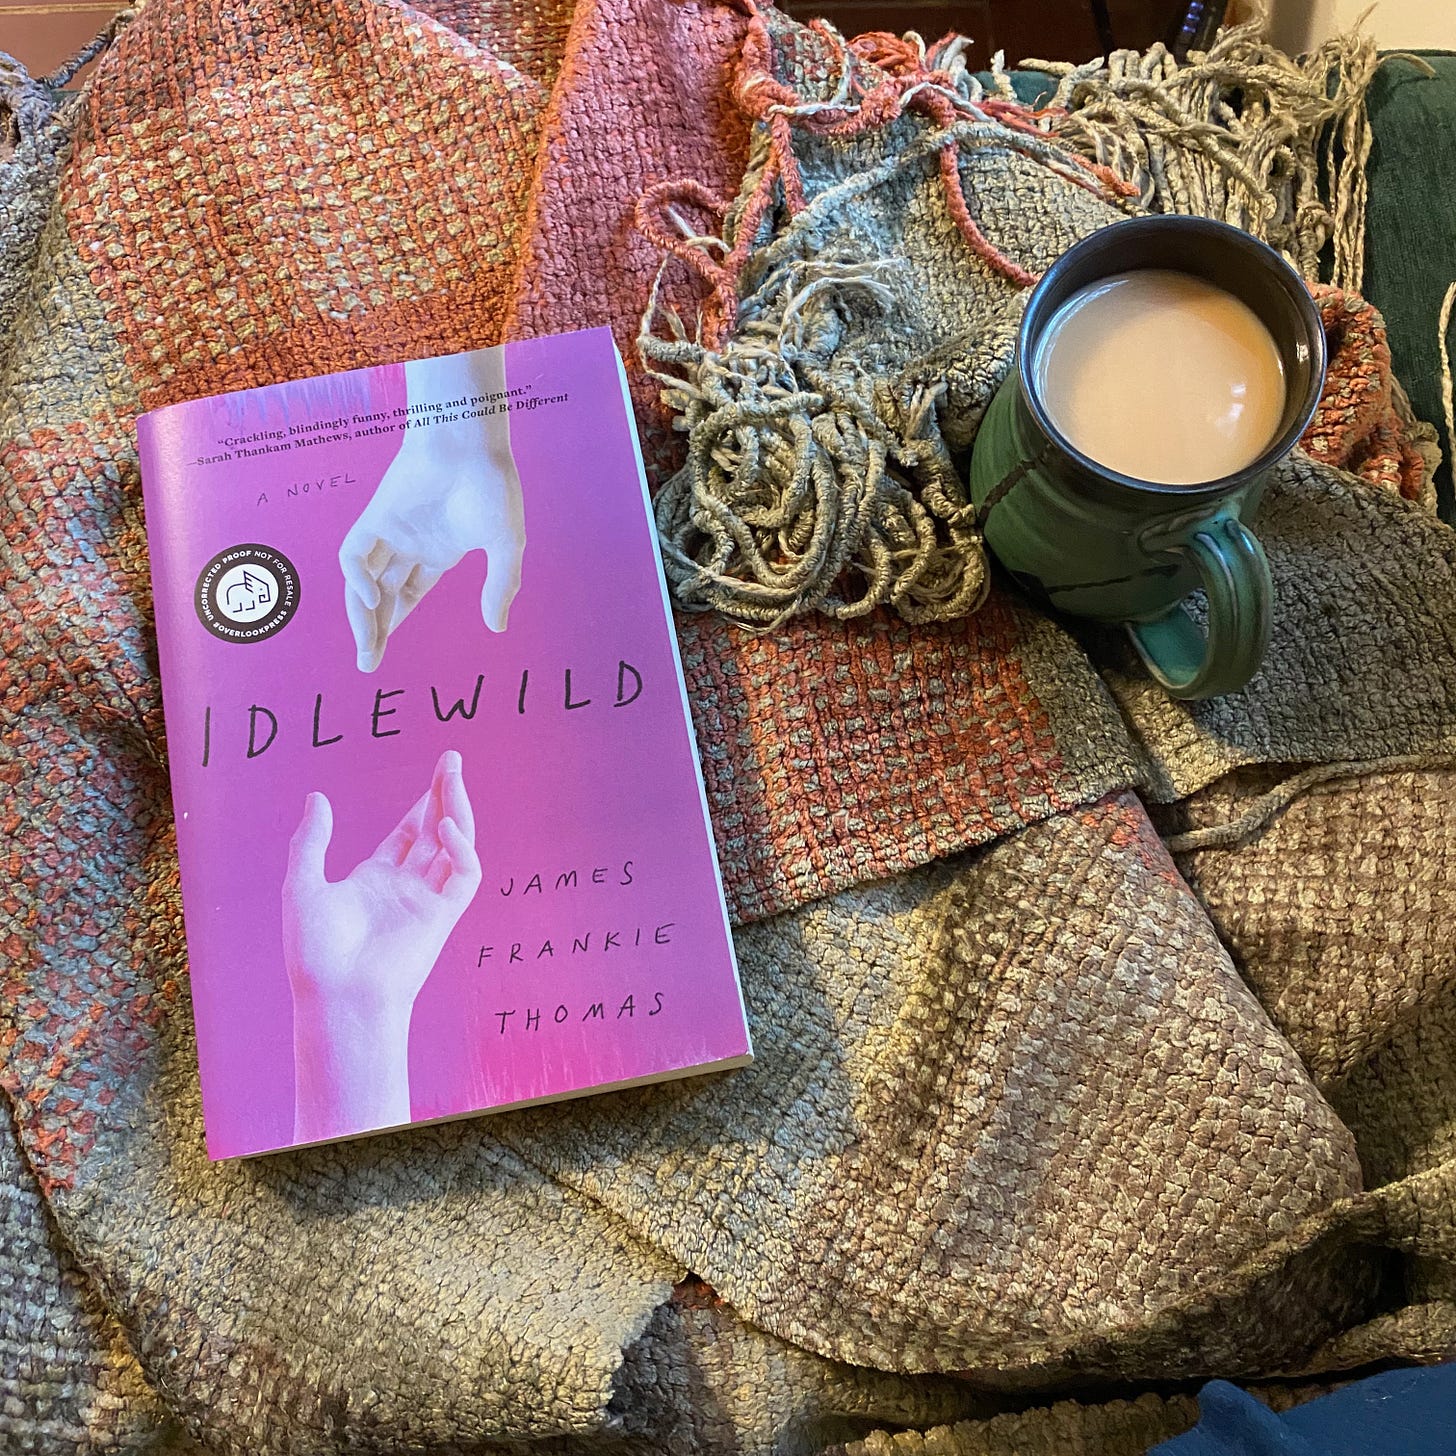 Idlewild on a brown and green blanket next to a ceramic mug of tea.